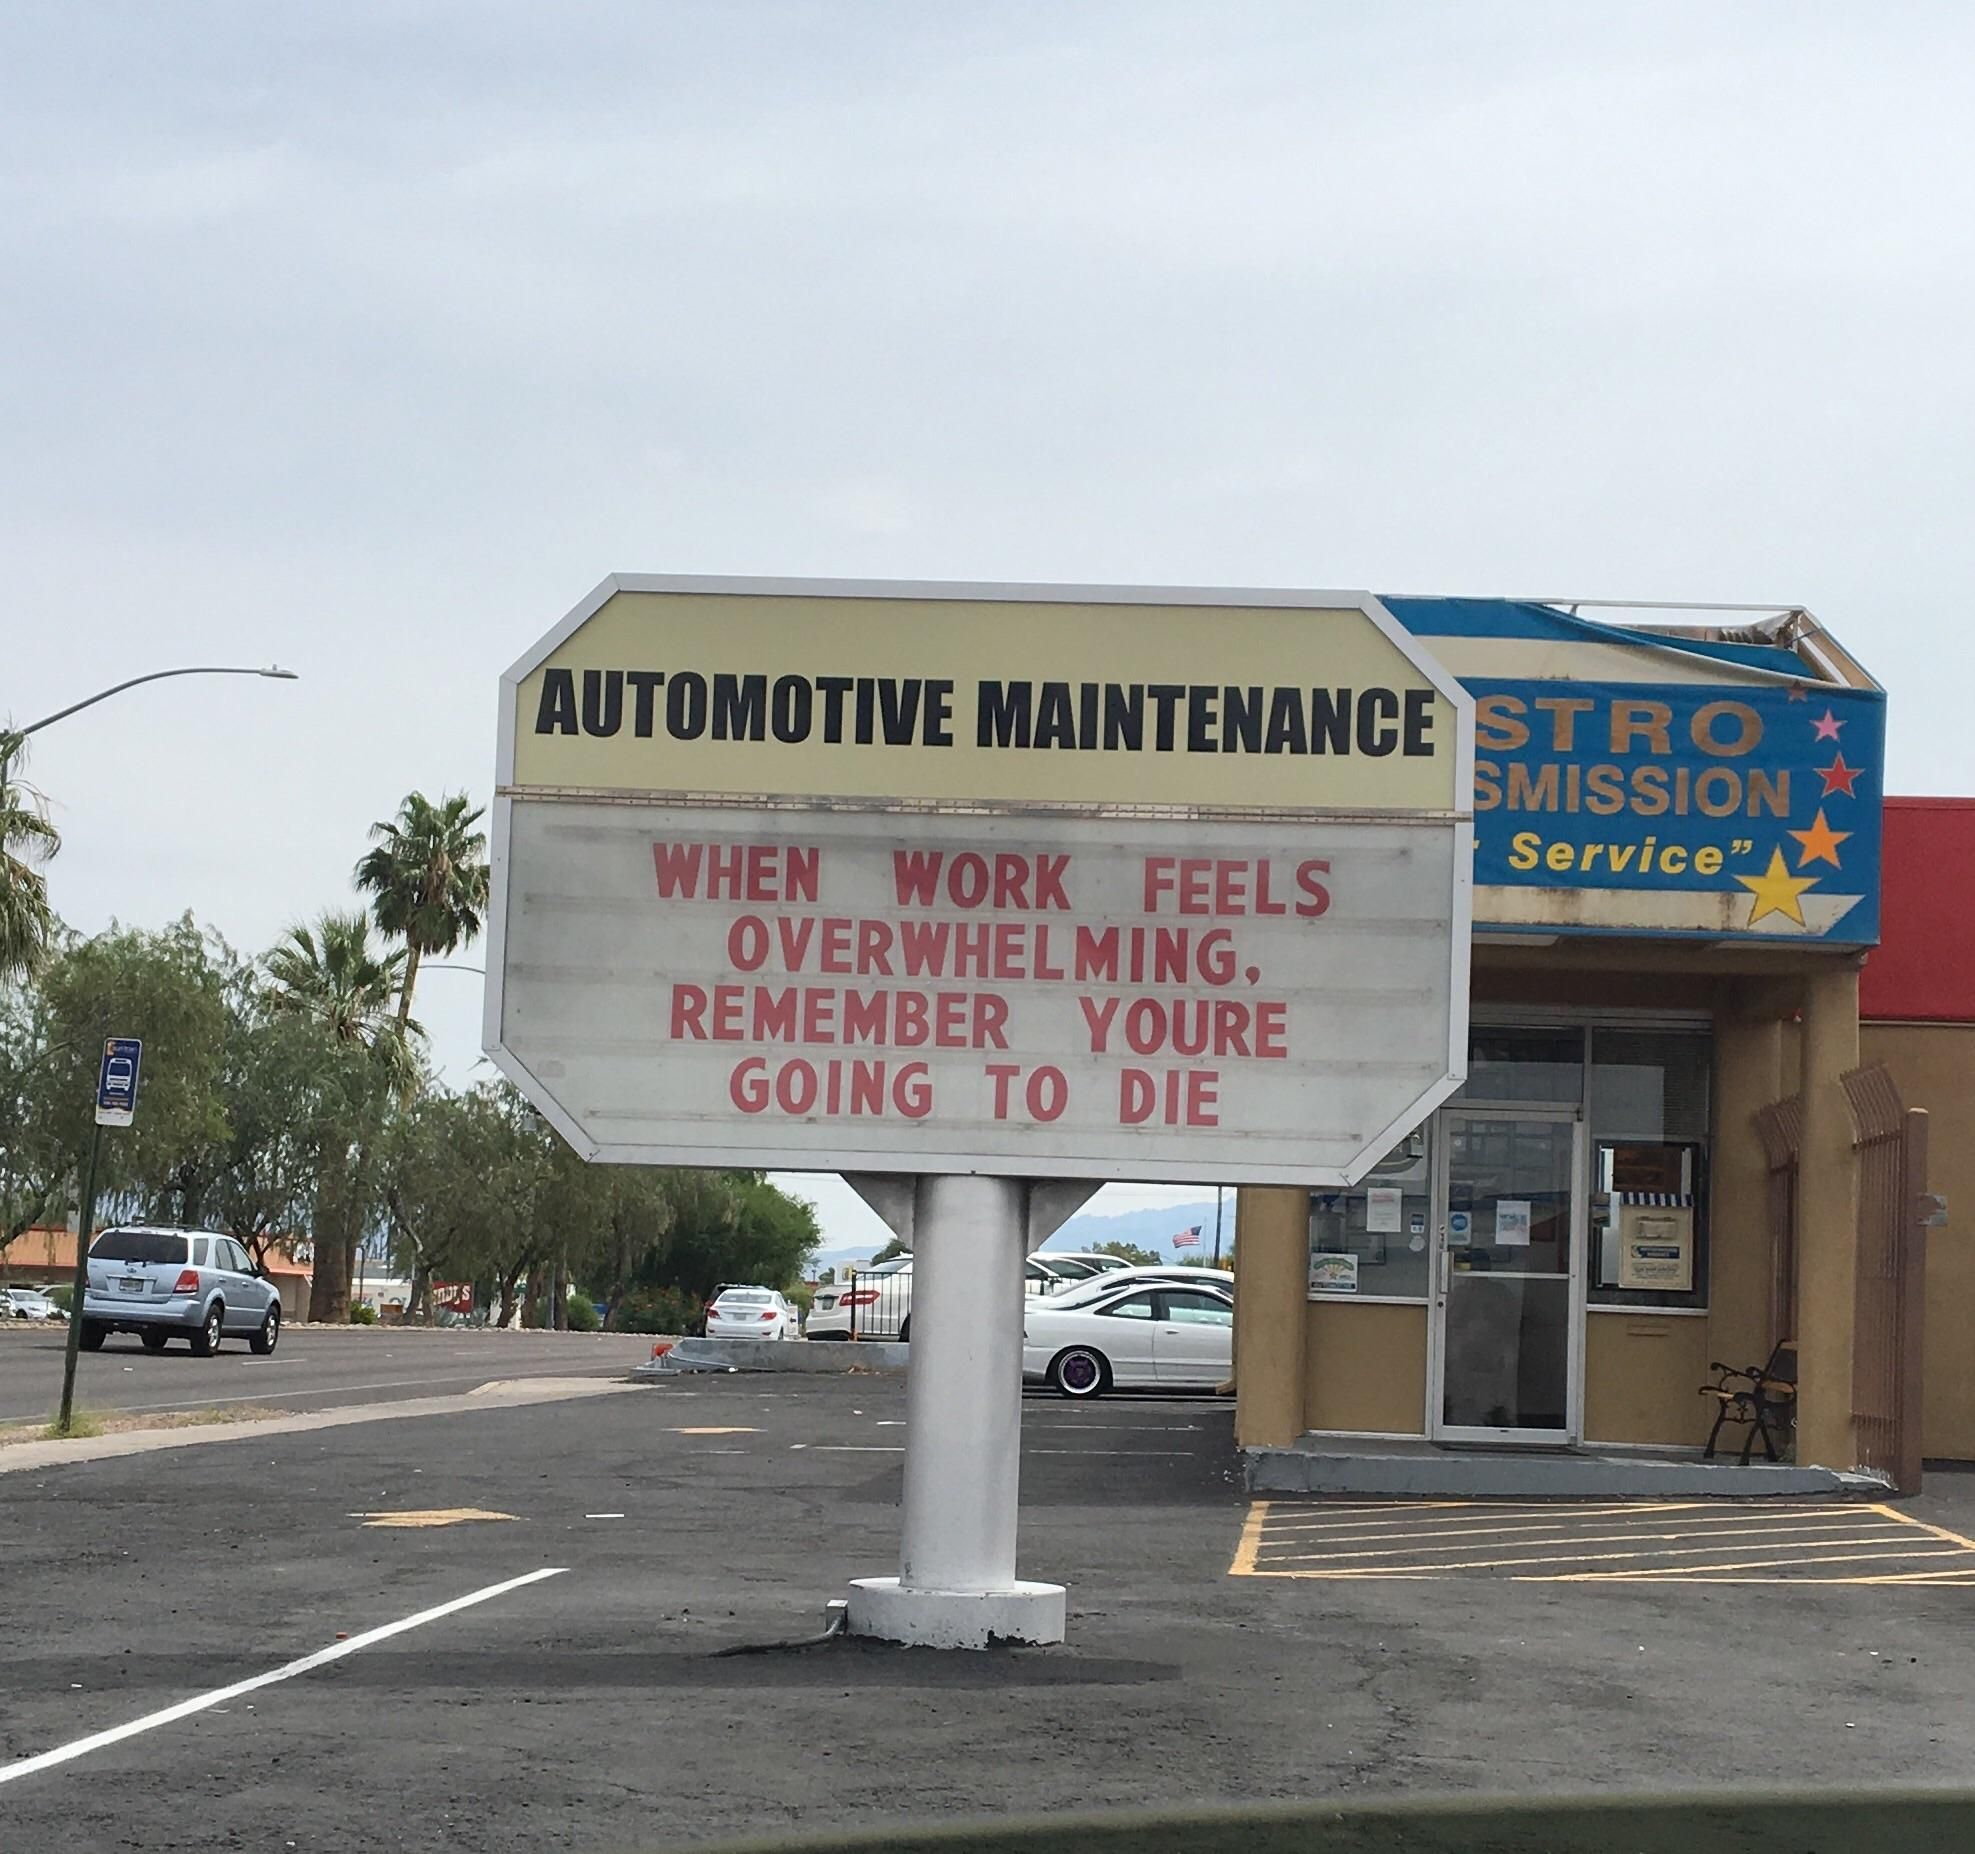 My local auto shop doles out a harsh truth.